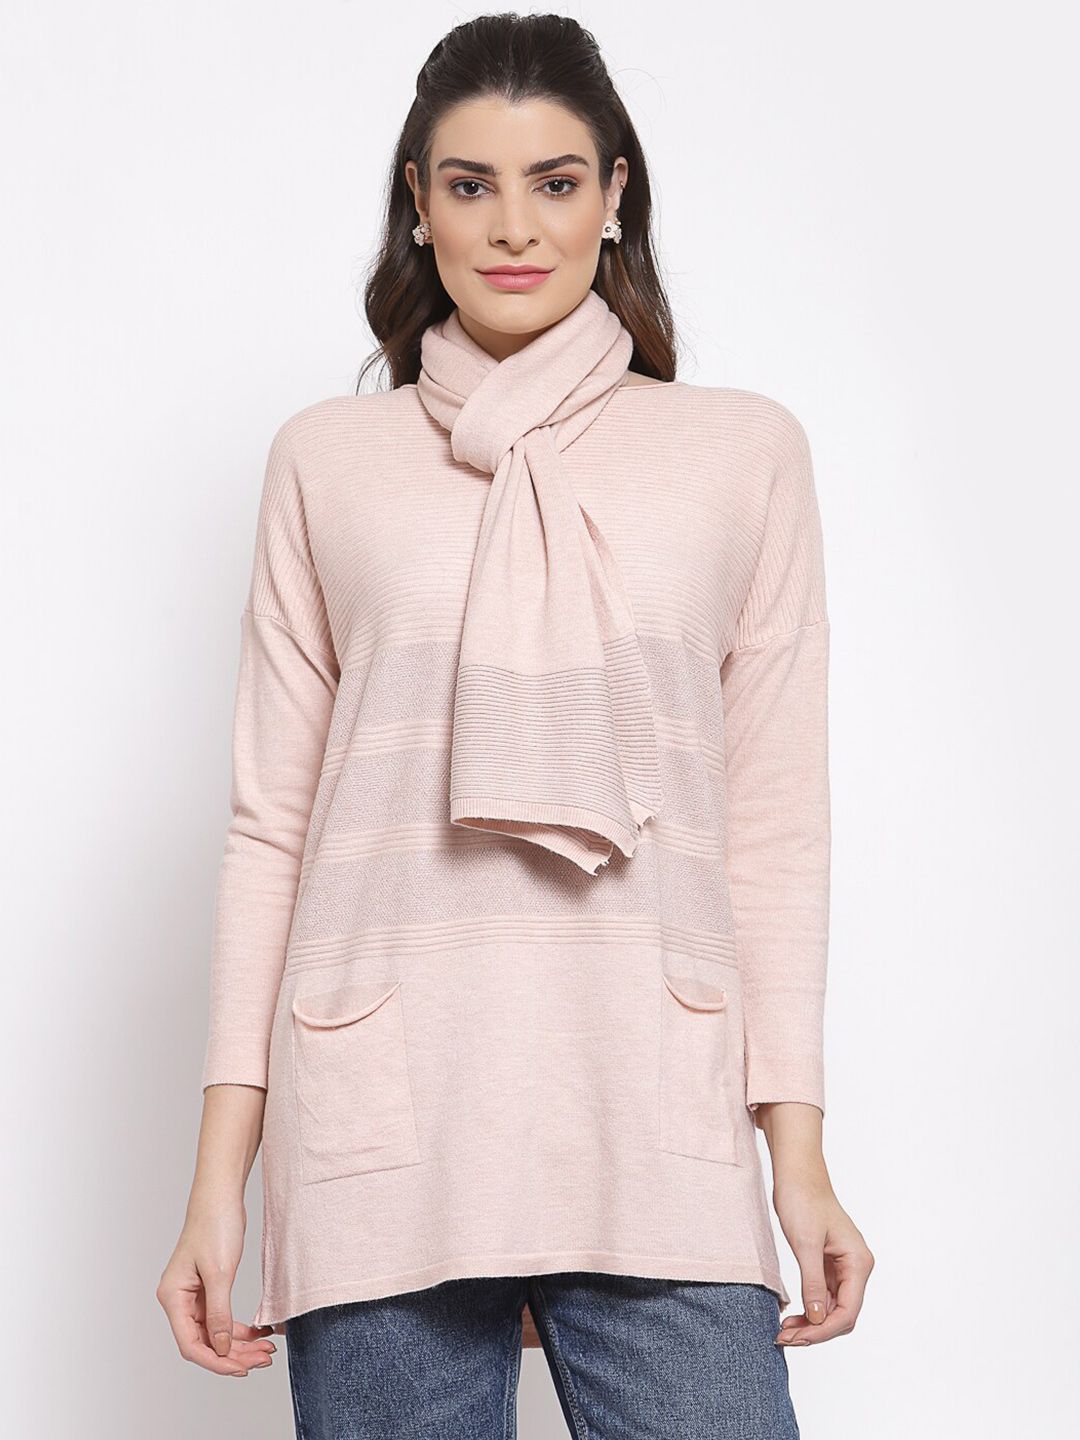 Mafadeny Women Peach-coloured Solid Longline Pullover Sweater With Muffler Price in India